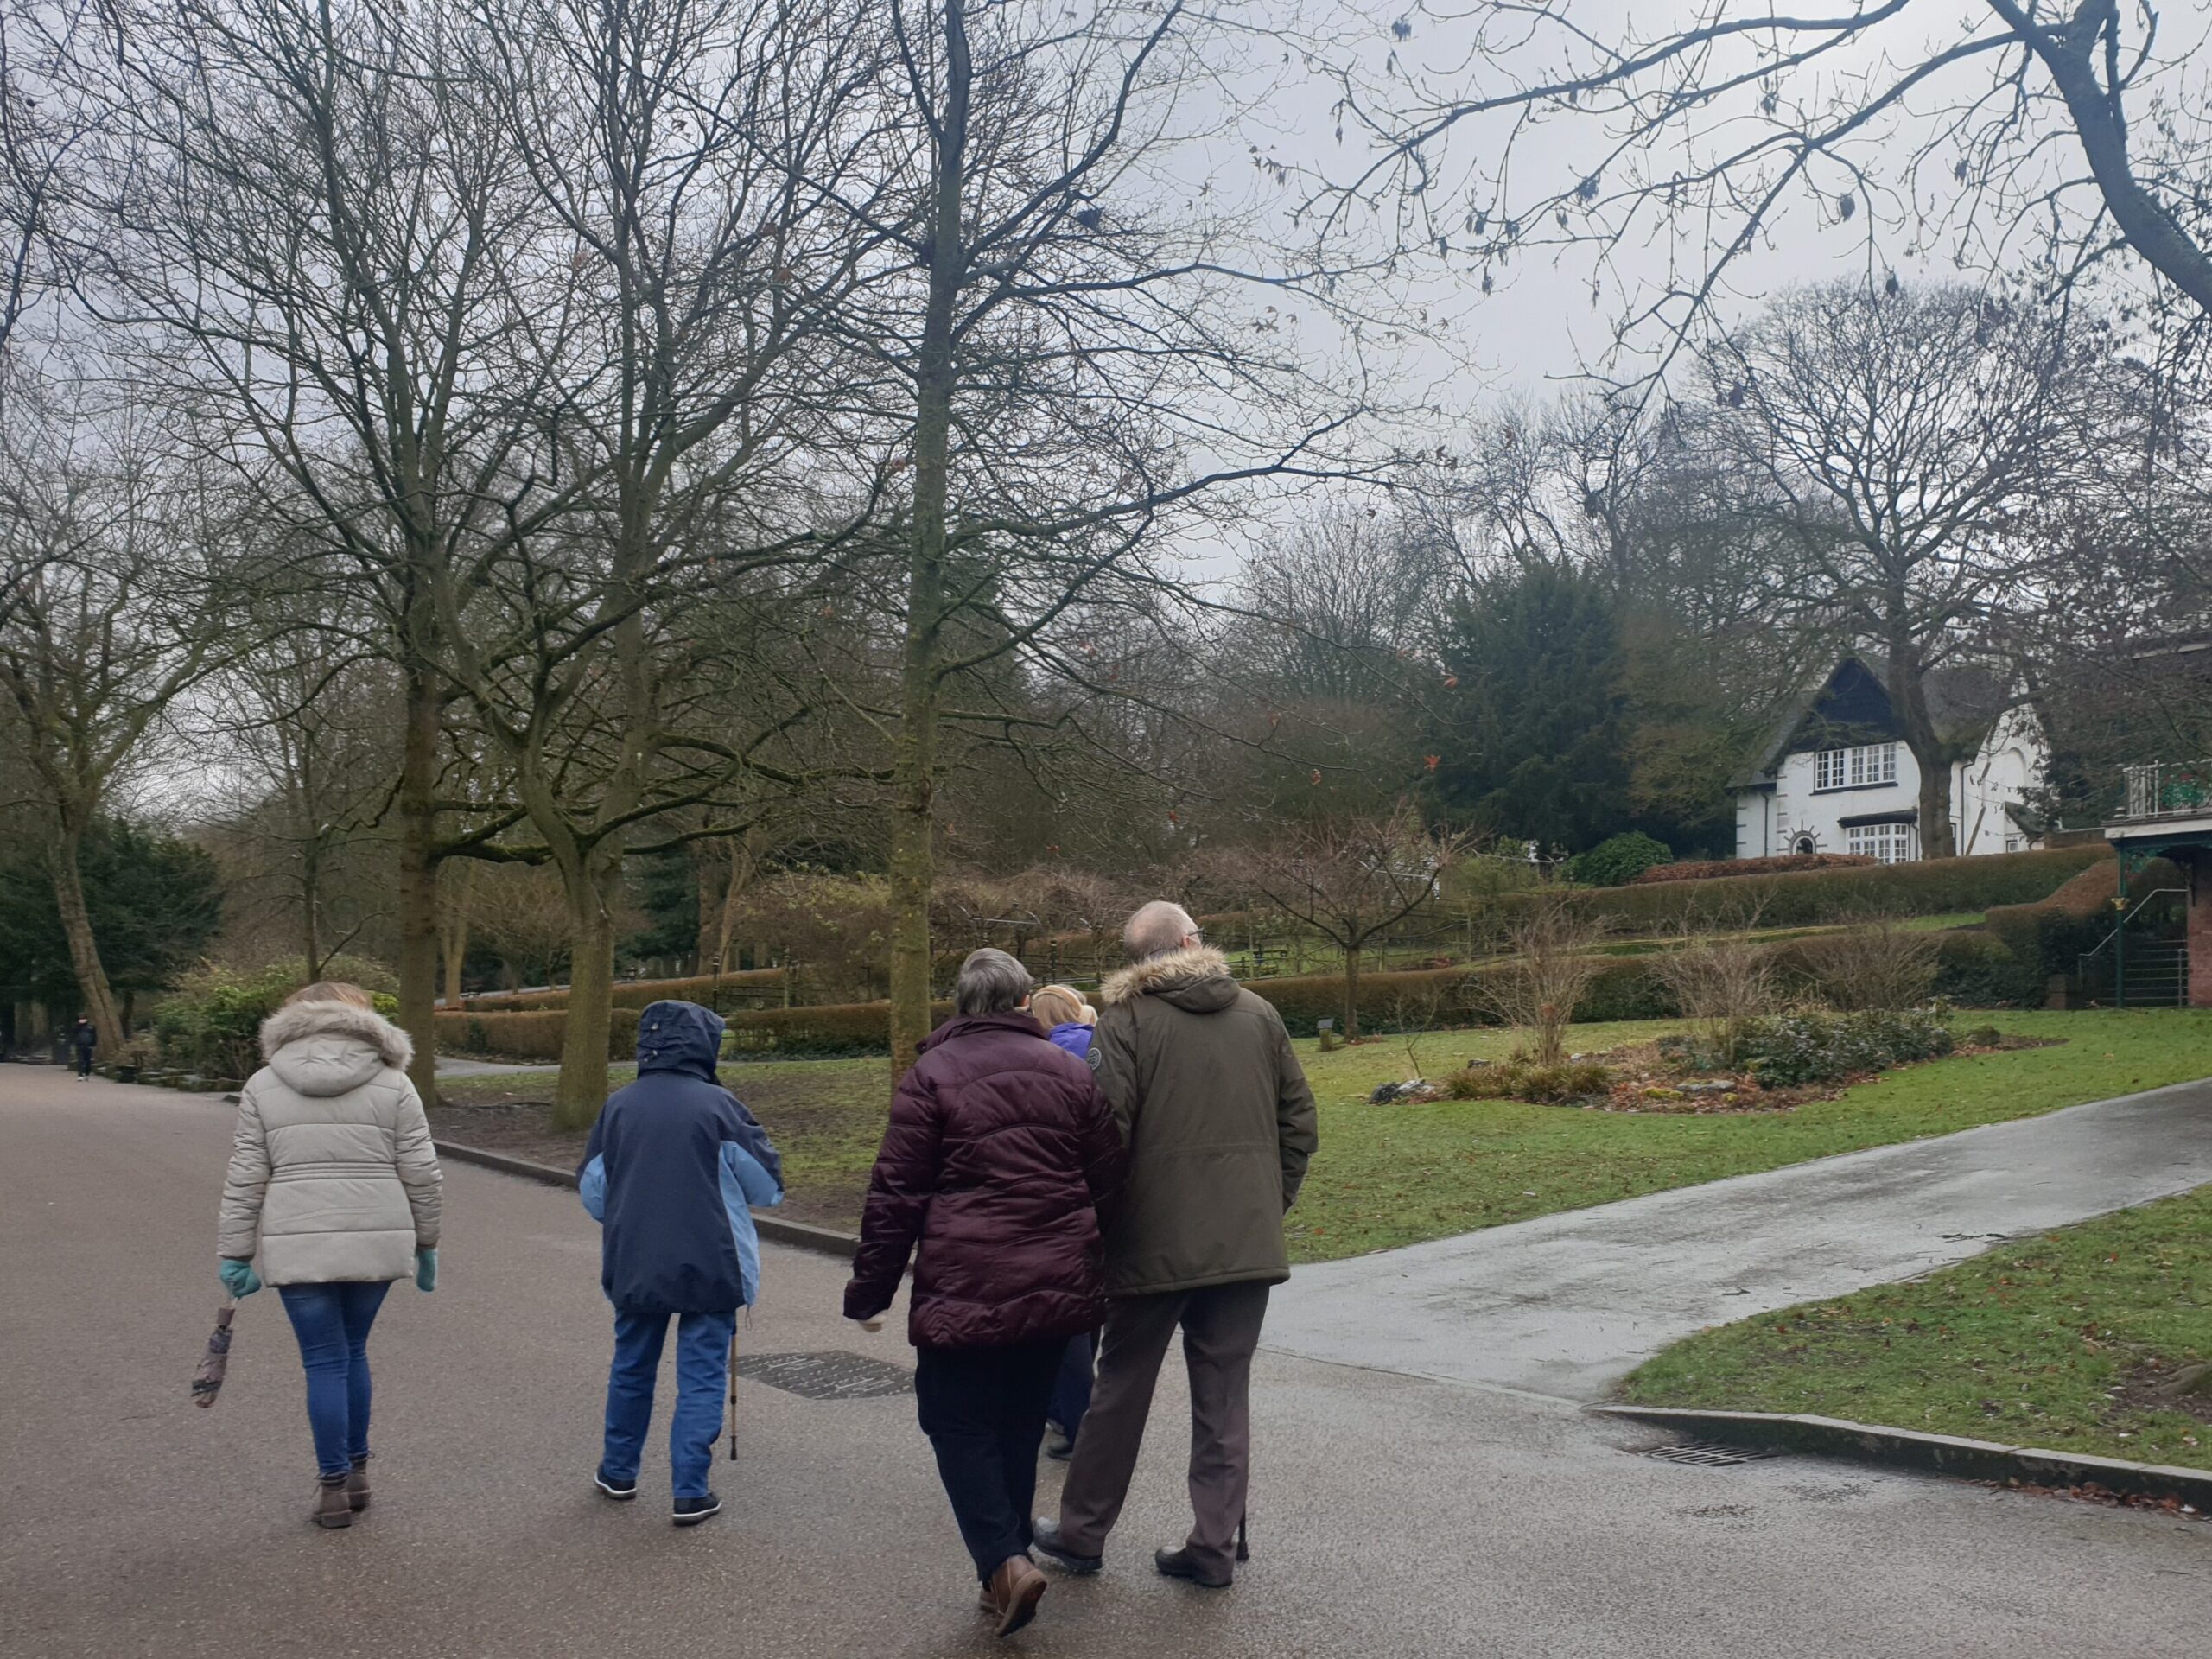 A photo of 5 people wrapped up in winter coats taking a walk around Walsall Arboretum. The gardens are tended and the trees are without leaves. In the background, there is a historic building.